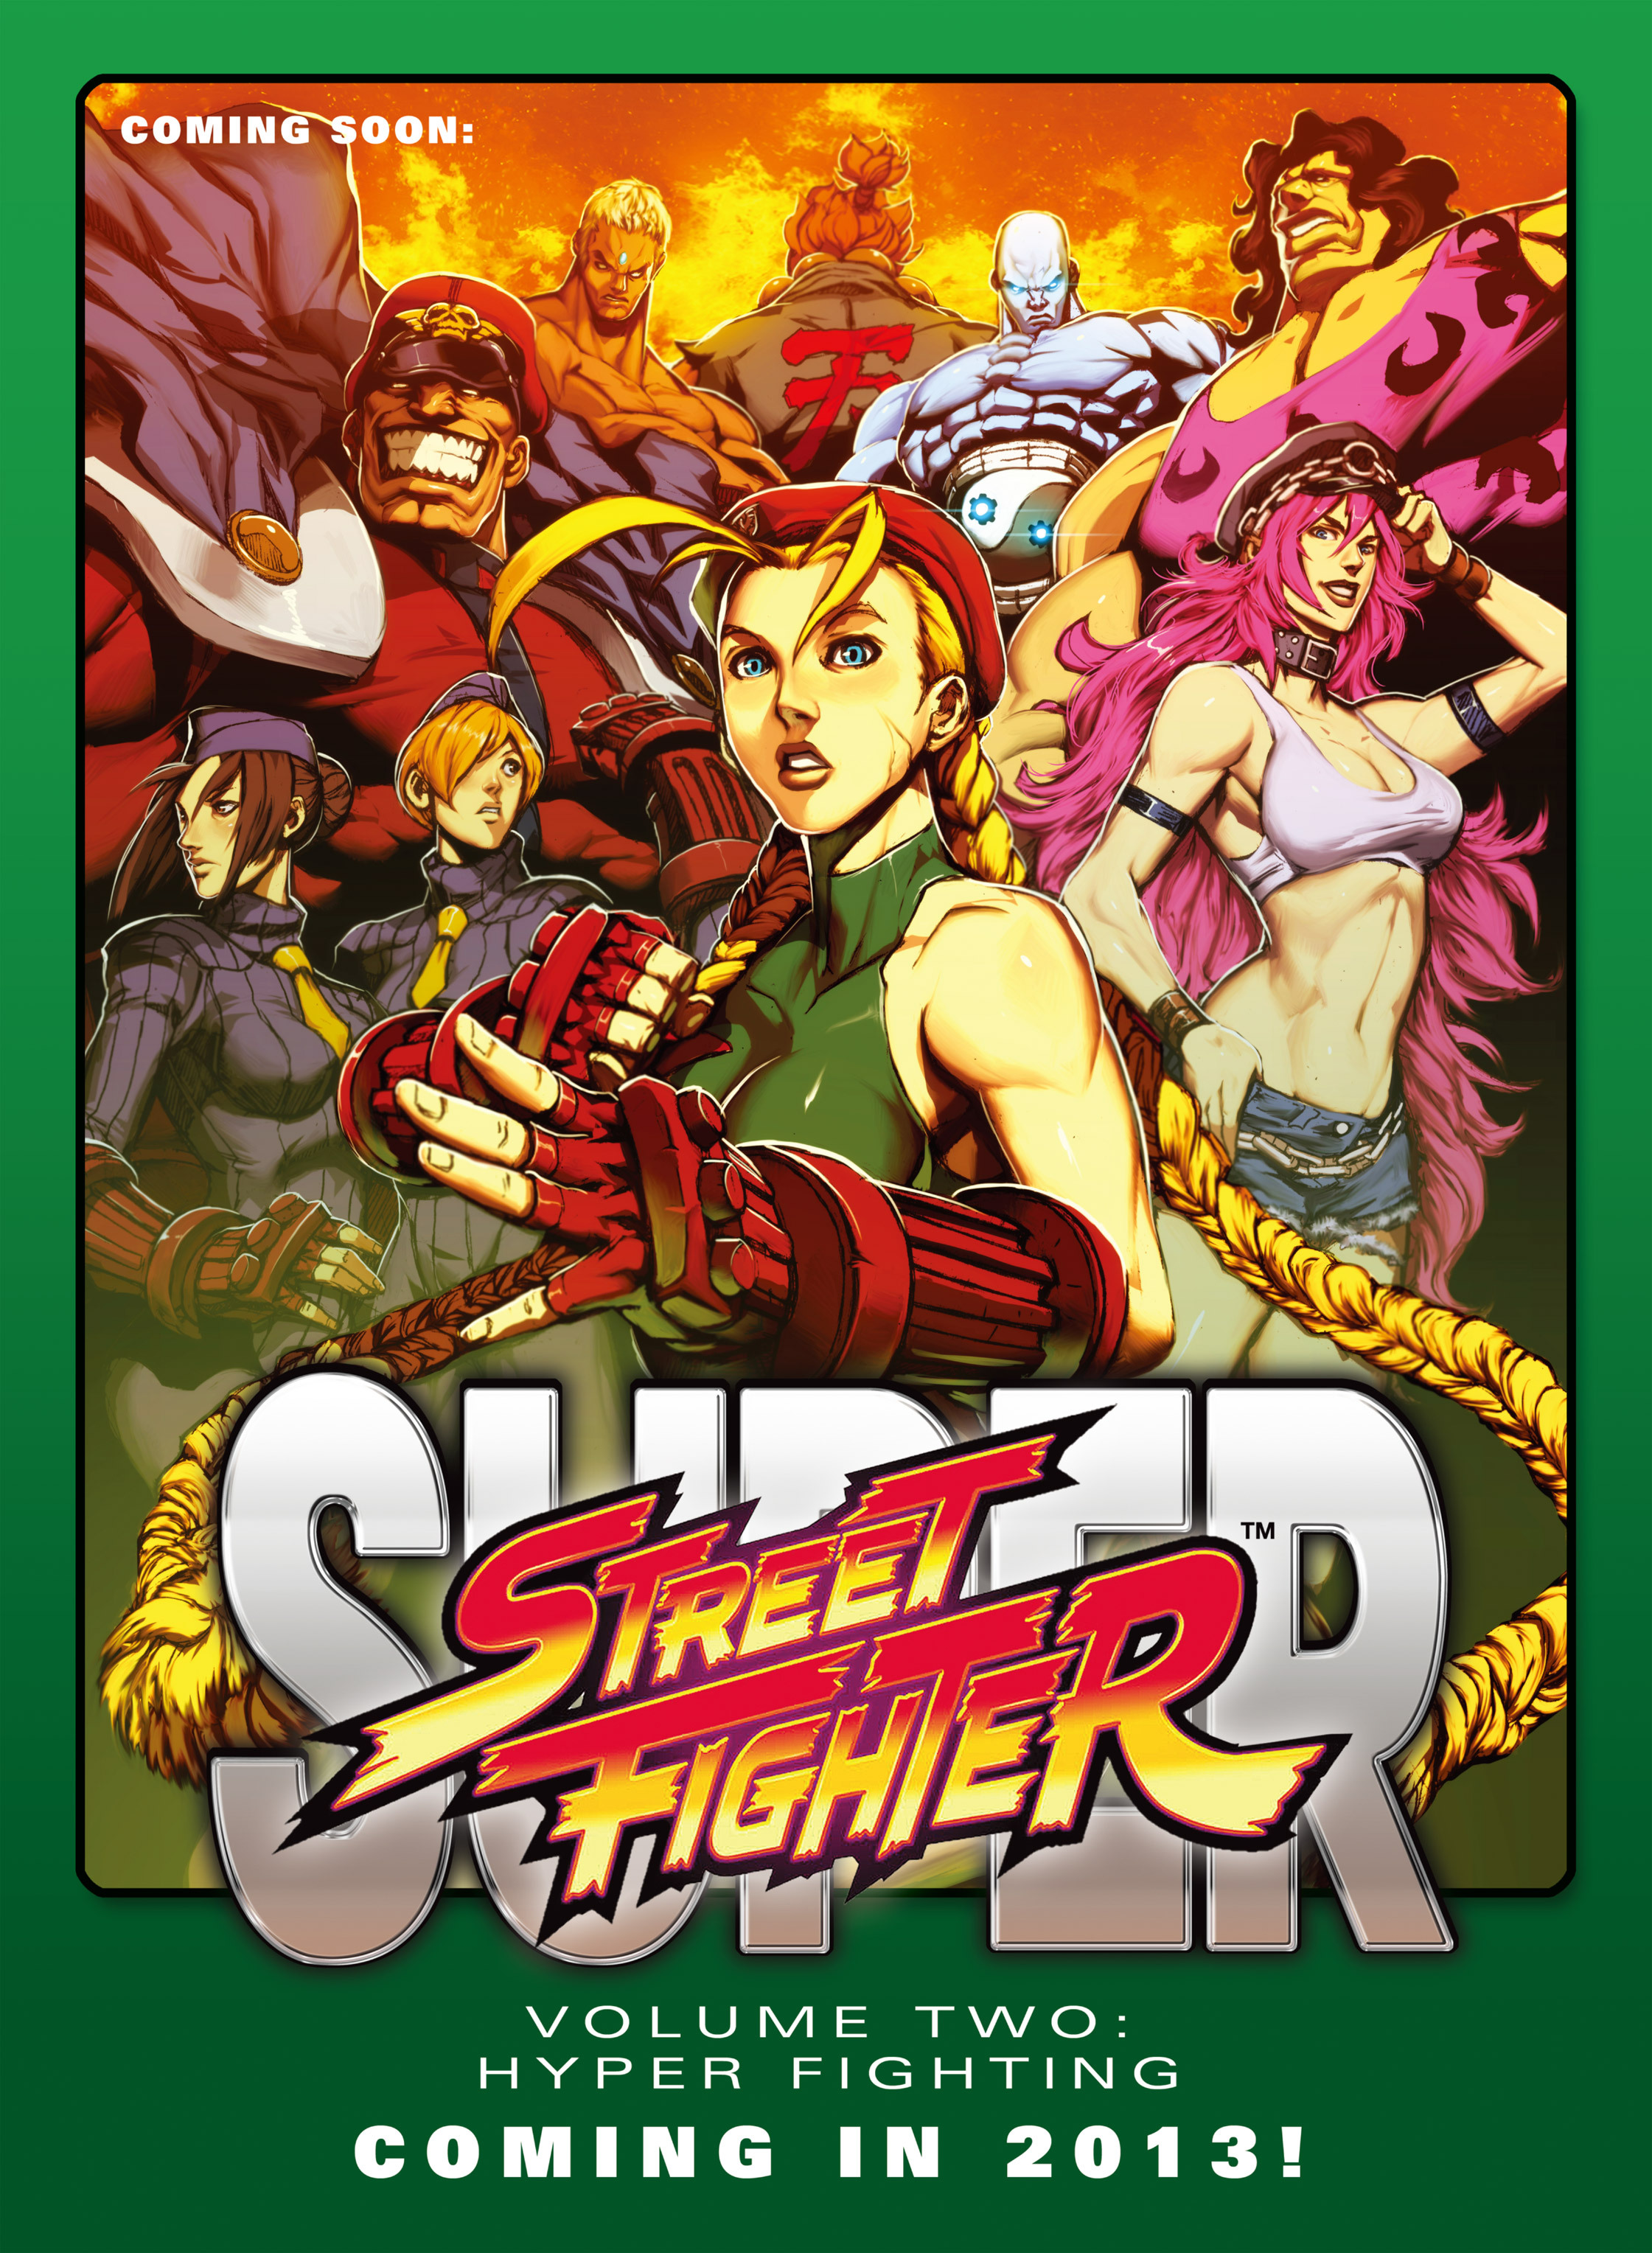 Read online Super Street Fighter comic -  Issue # Vol.1 - New Generations - 127